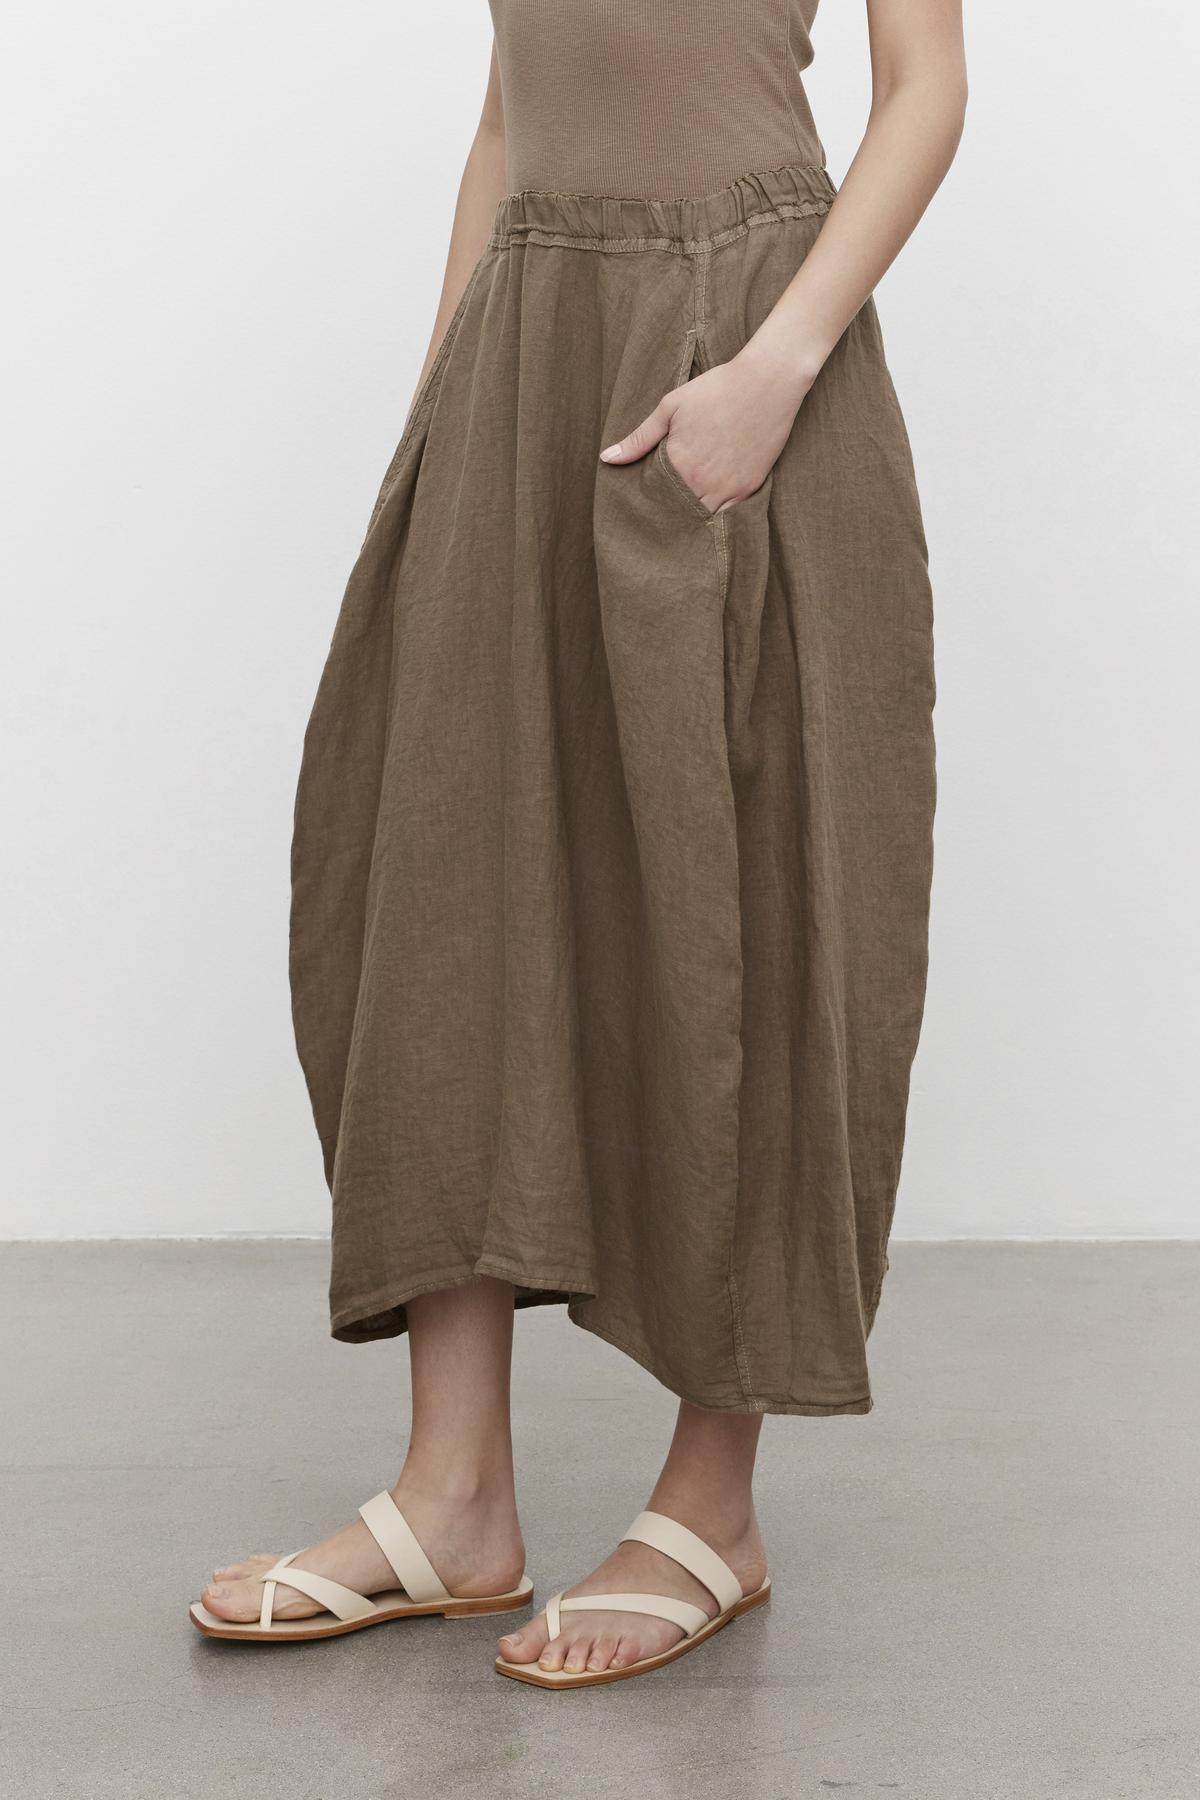 A person wearing a Velvet by Graham & Spencer FAE Linen A-Line Skirt with an elastic waistband and sandals against a plain background.-36443407122625